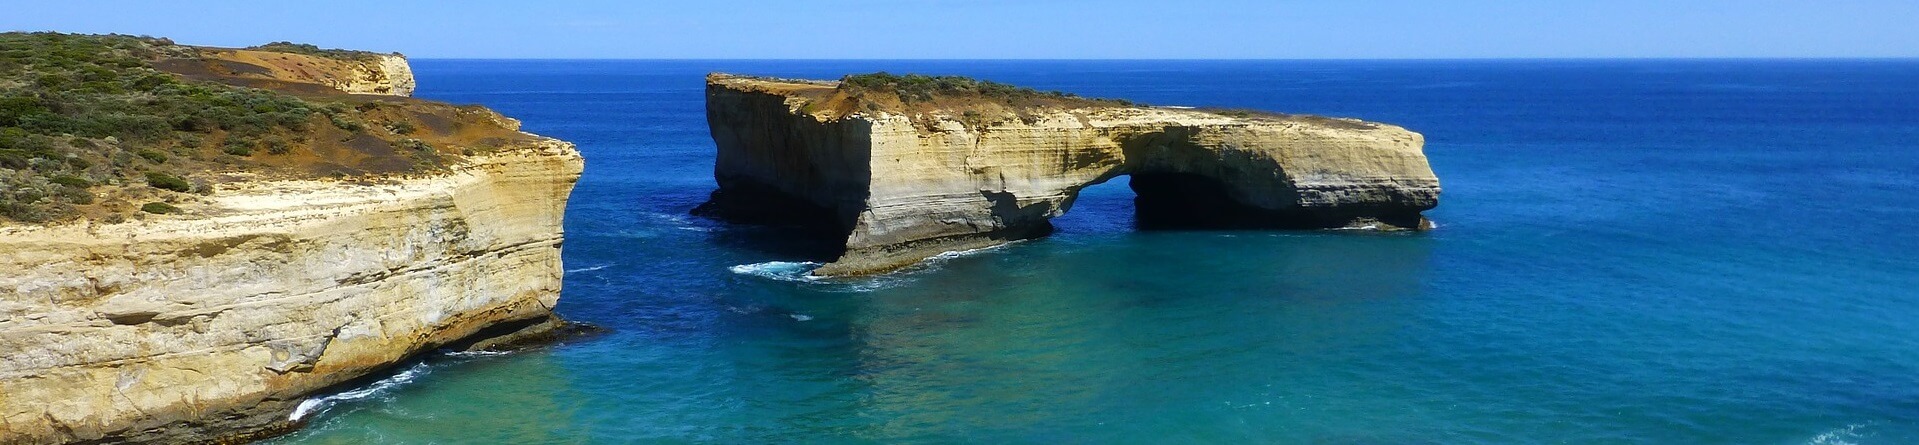 What is Port Campbell known for?